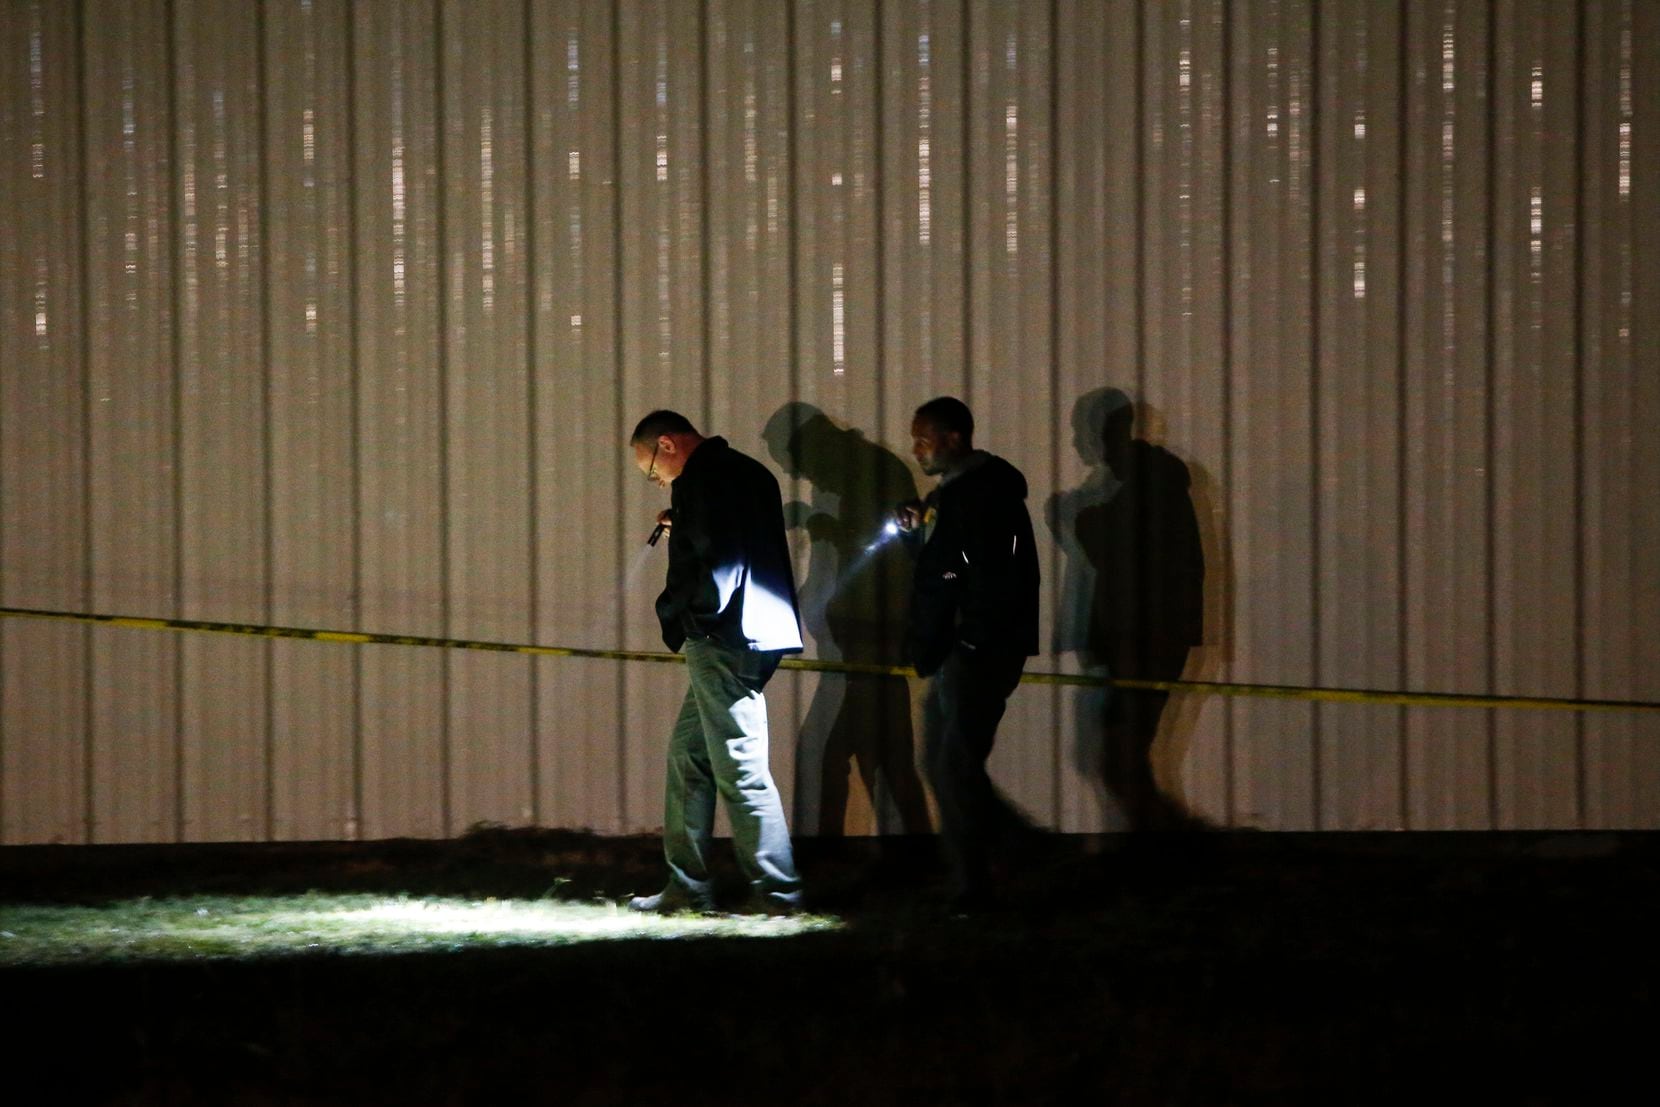 Officials work a crime scene after a shooting at Party Venue on Highway 380 in Greenville, Texas.